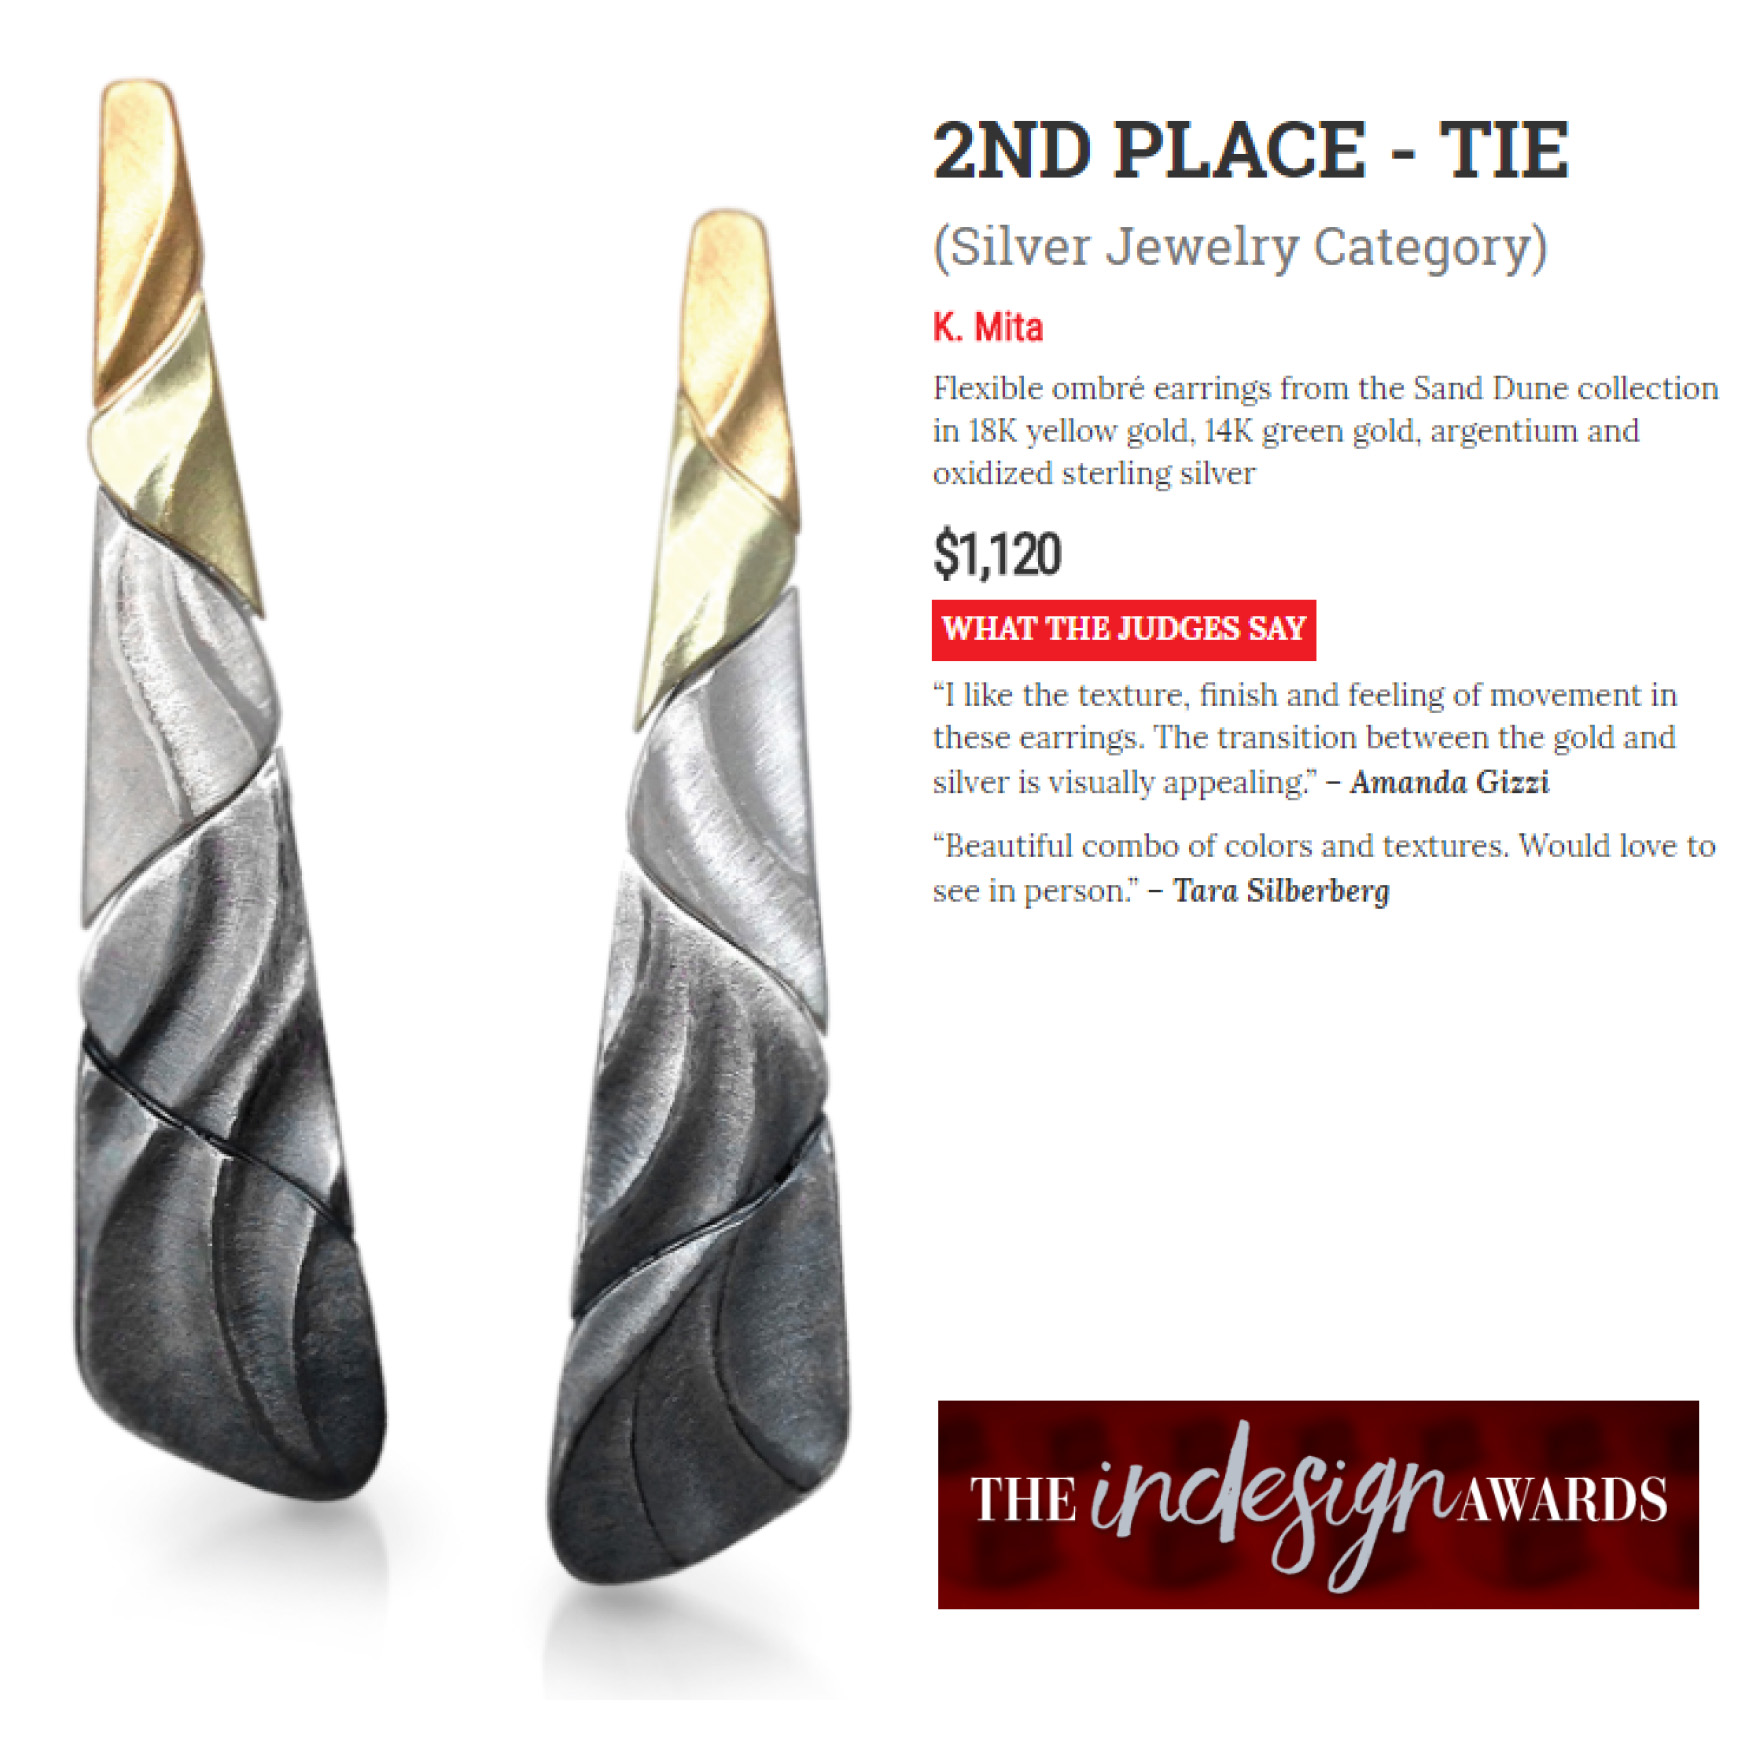 Award Winning Ombre Earrings from K.Mita | InDesign Awards